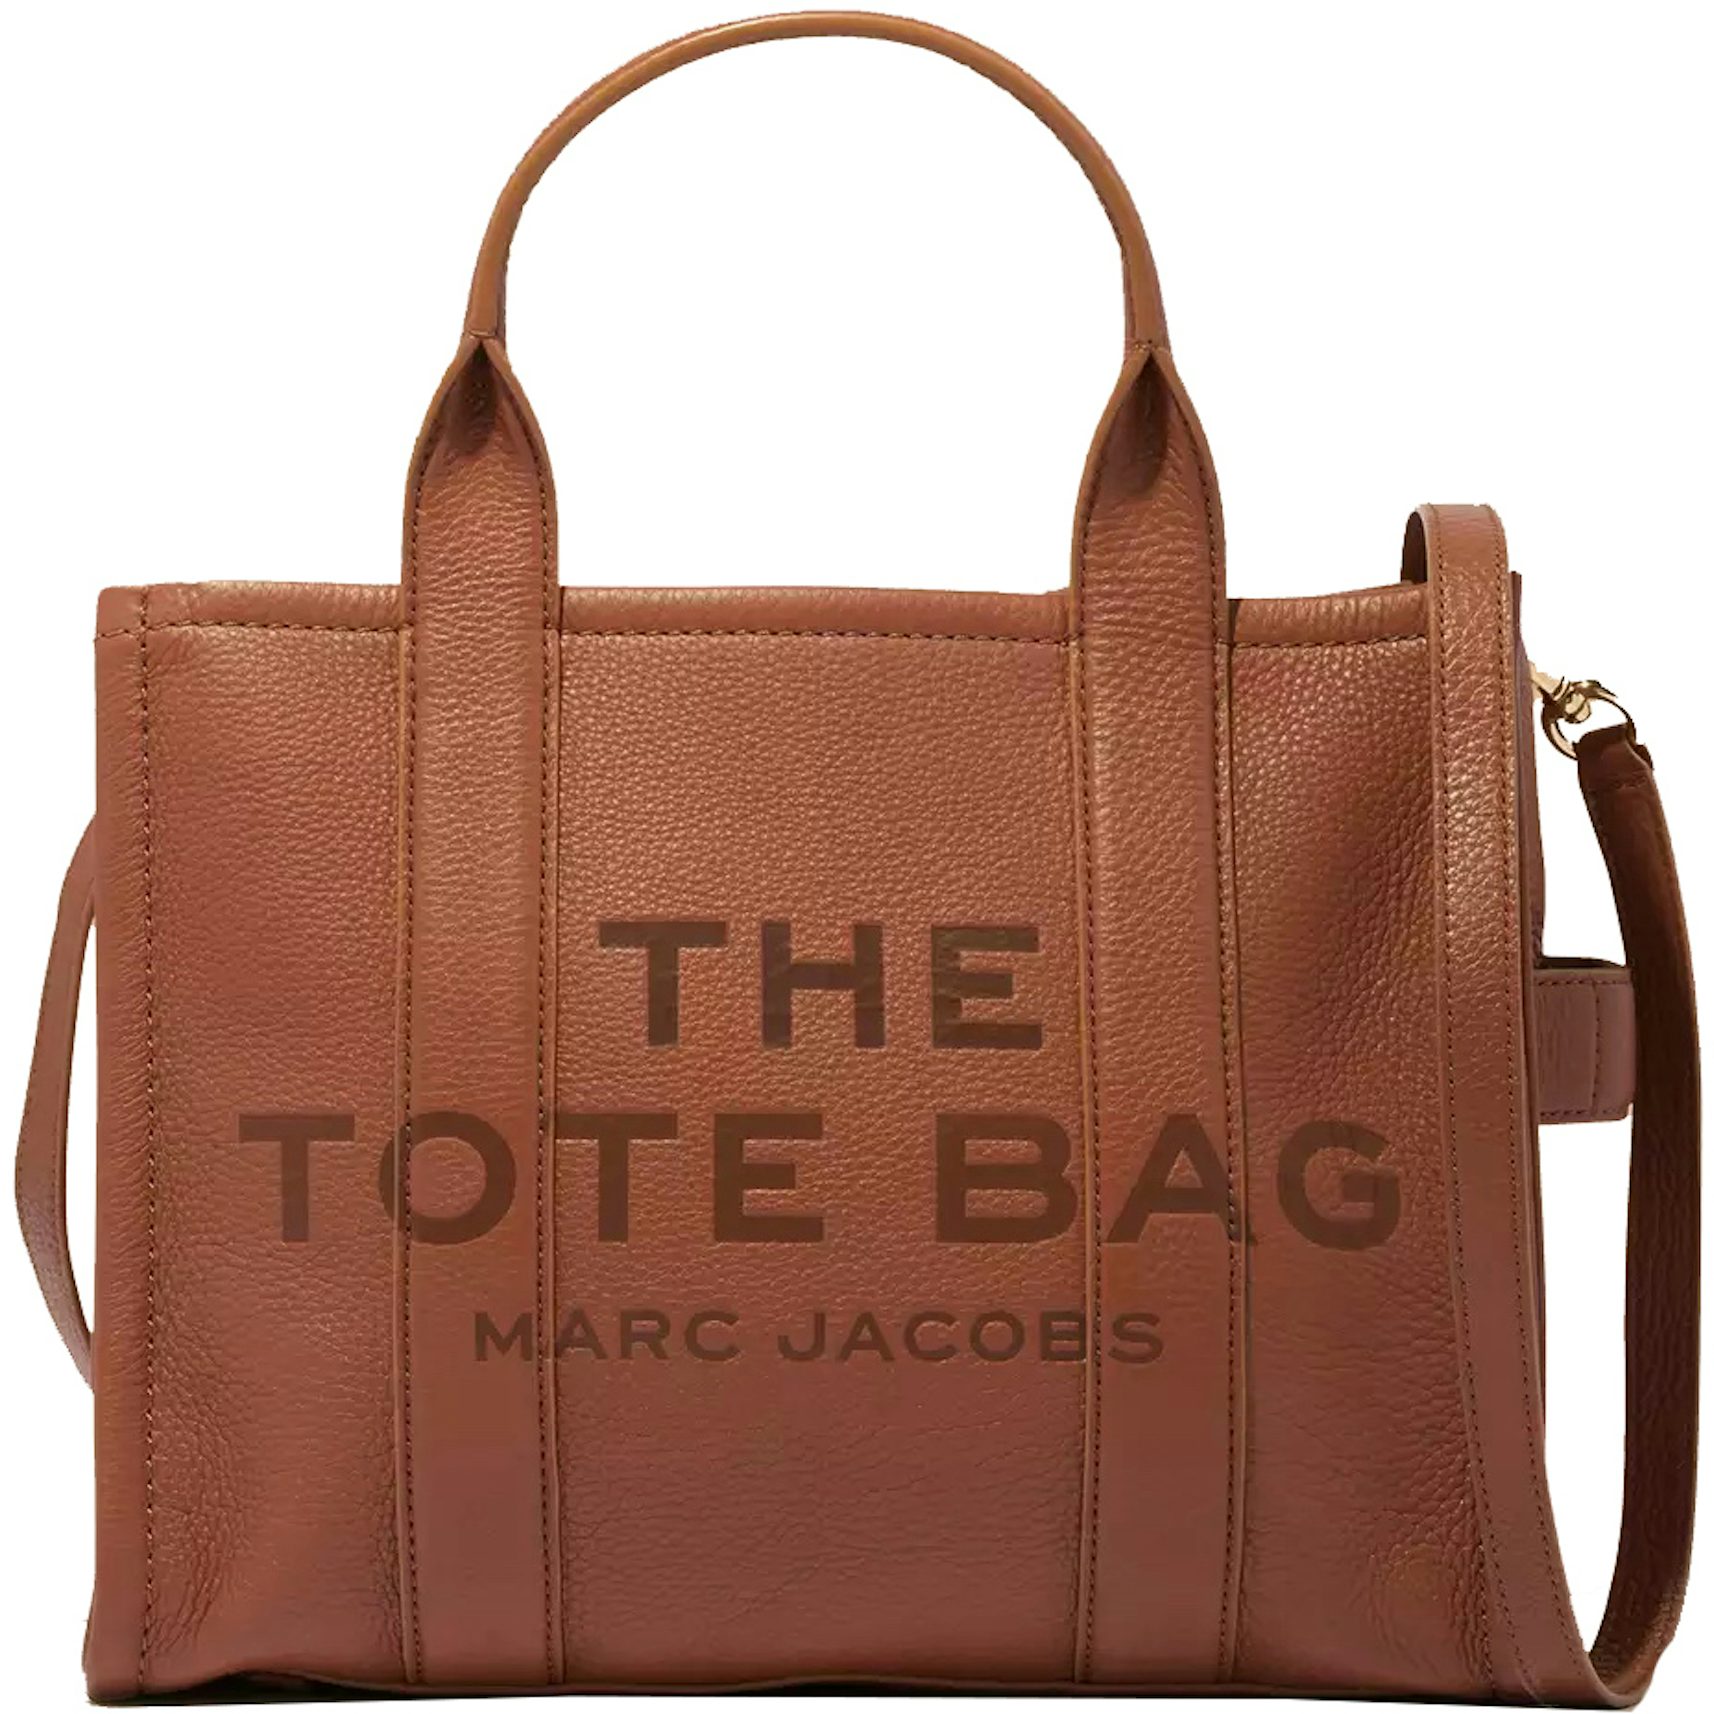  Marc Jacobs The Leather Tote Bag Argan Oil One Size